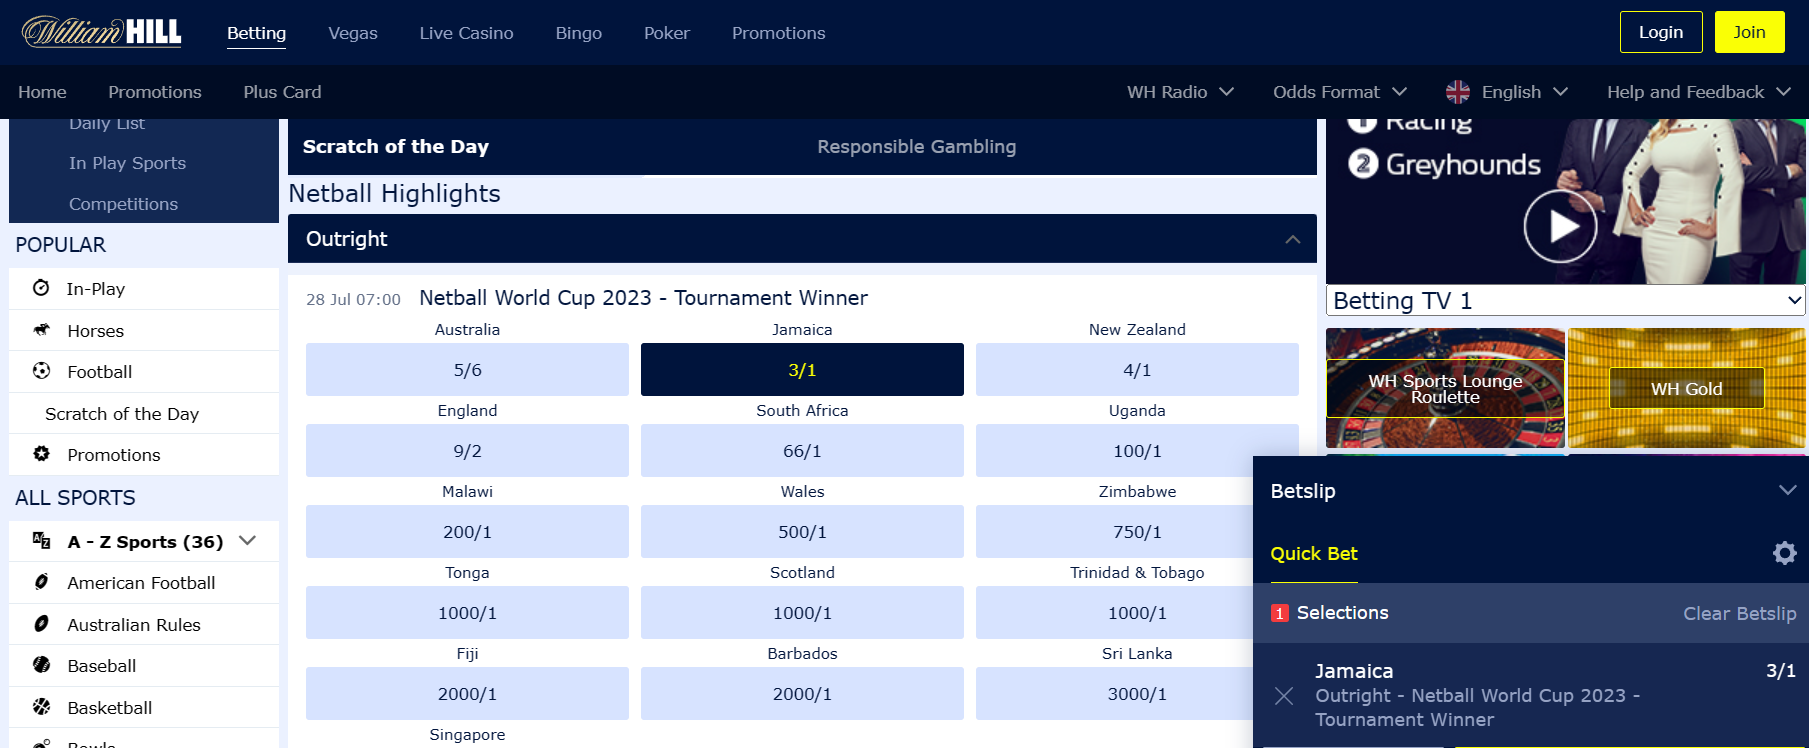 Netball World Cup odds at William Hill